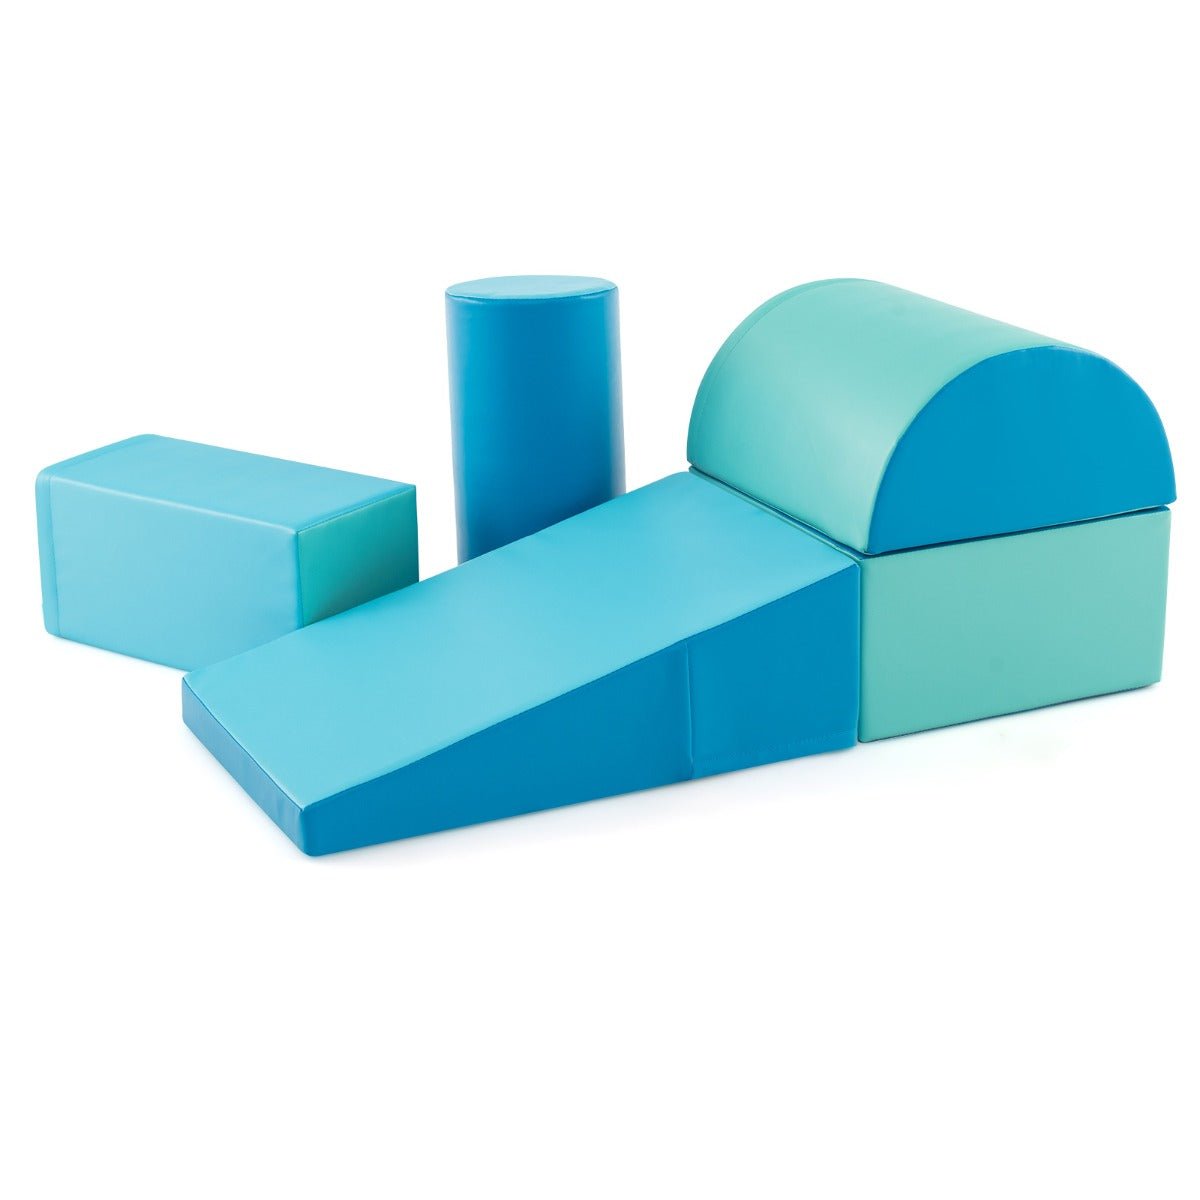 Soft Block Playset for Active Kids